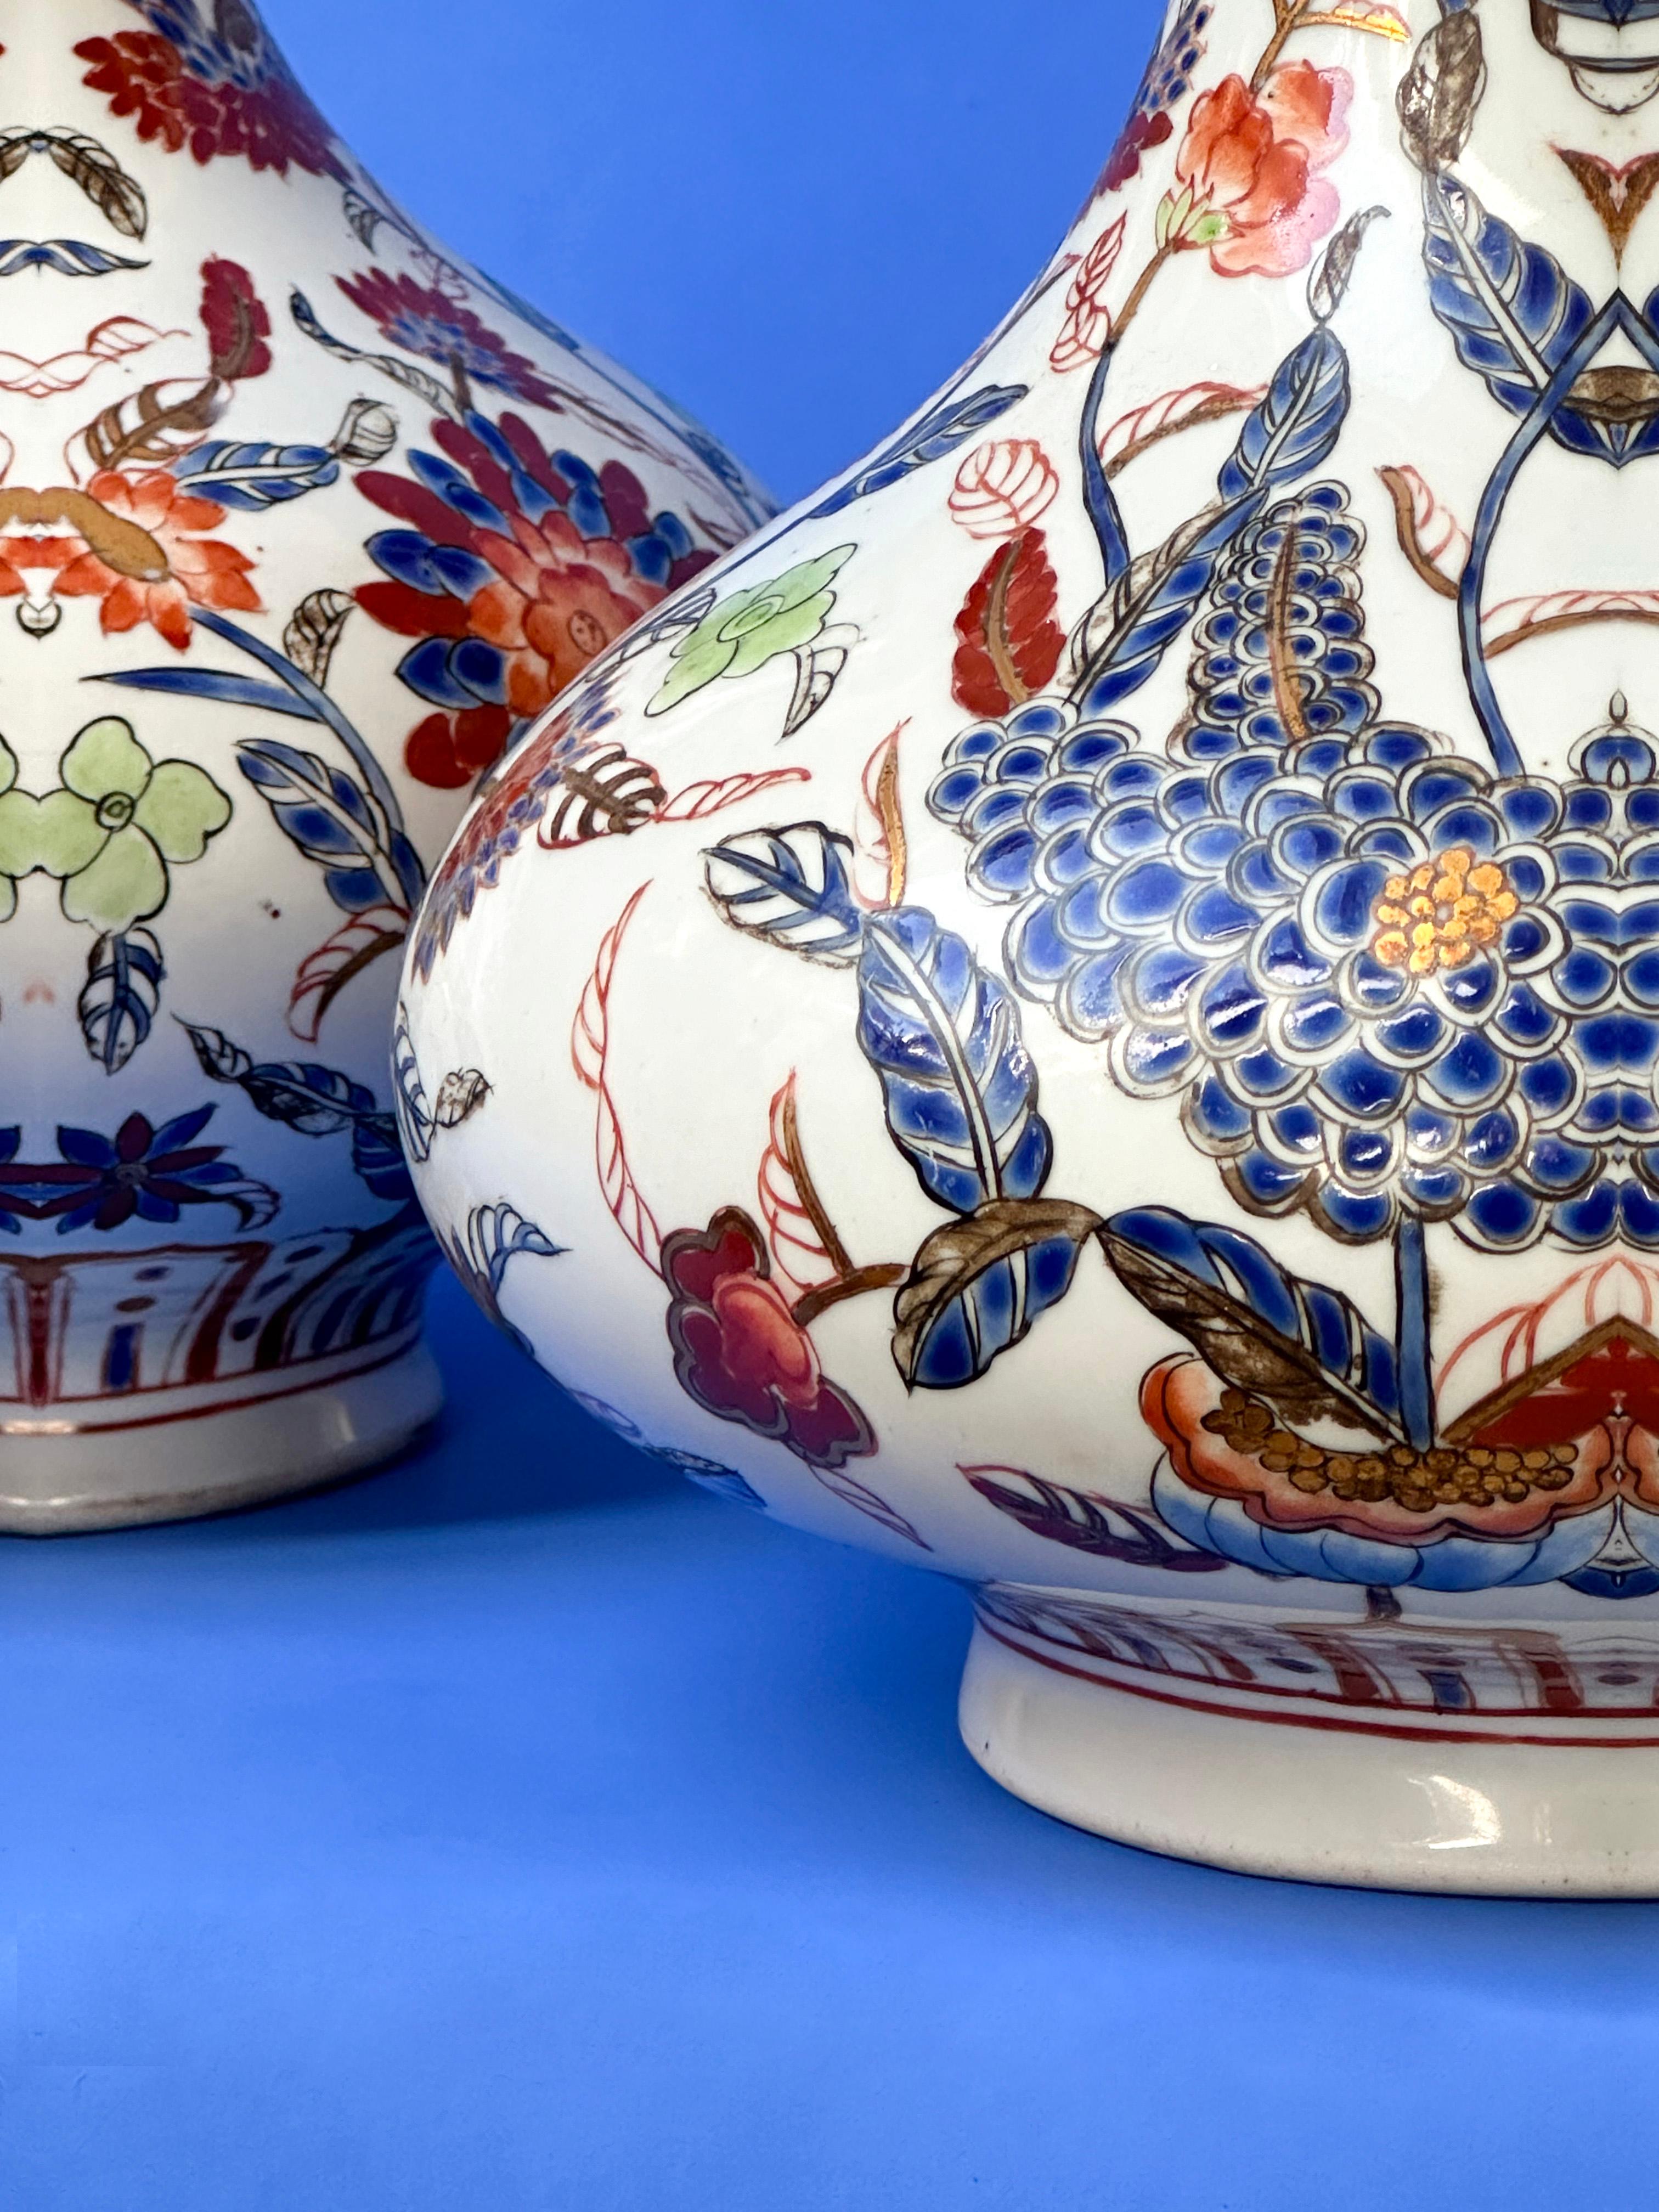 This matching pair of Chinese porcelain vases, features a classic pear shape, which is known as known as 'yuhuchunping'

Each vase is meticulously adorned with an elaborate array of hand-painted, stylised floral motifs in deep red and vibrant blue.